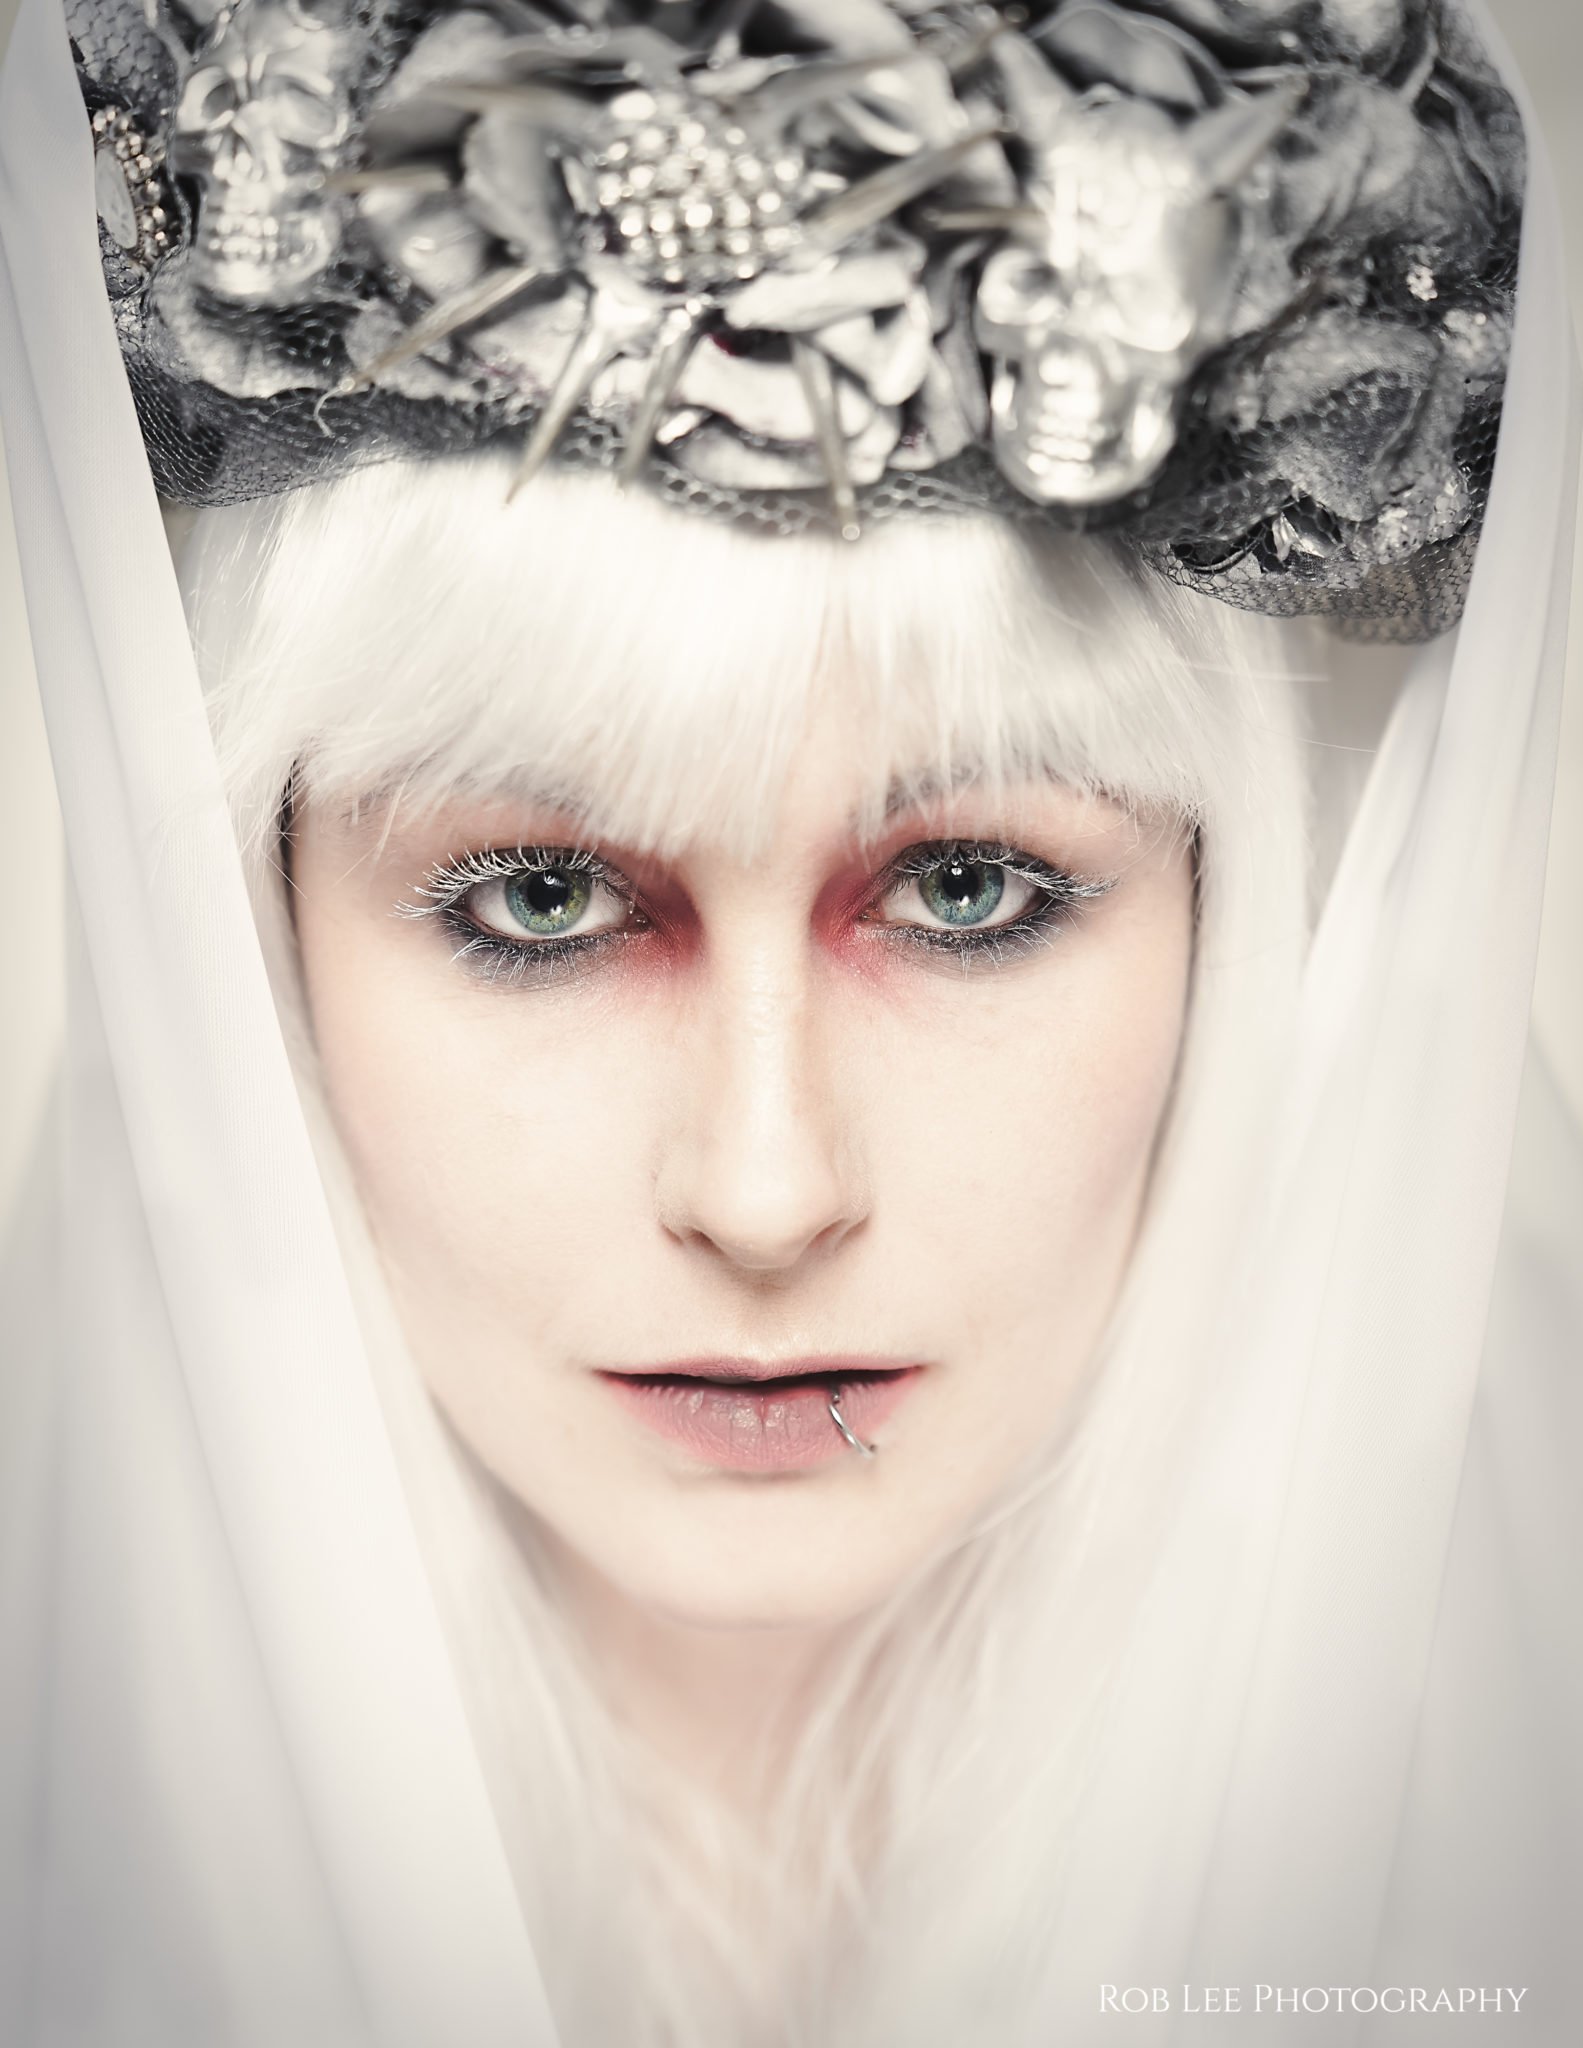 Creating the Photograph: Rob Lee's "The Ice Queen"